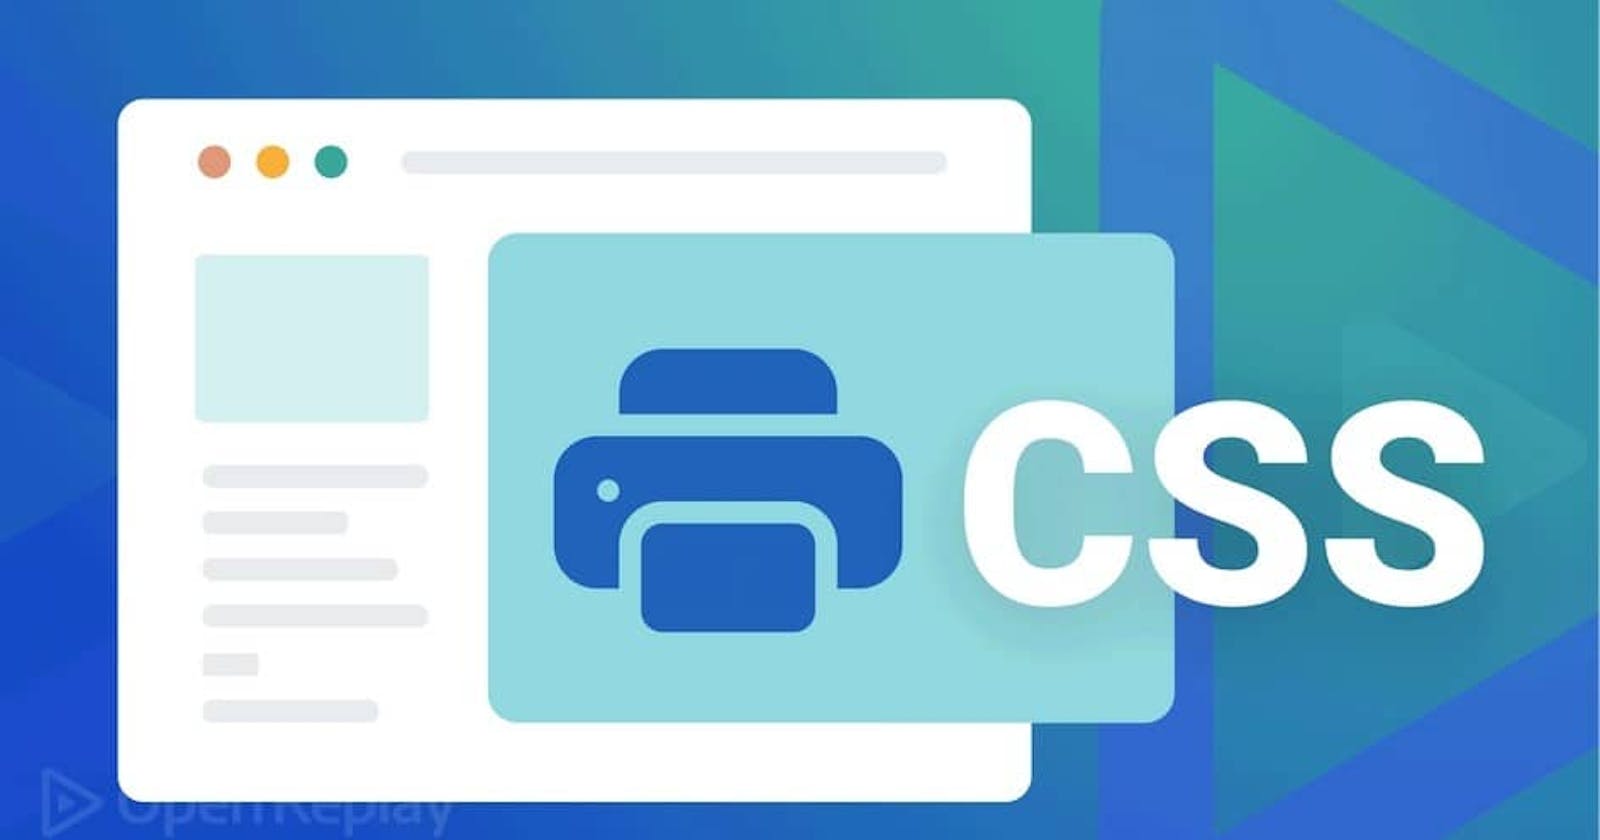 How to Make Your Web Pages Printer-Friendly With CSS